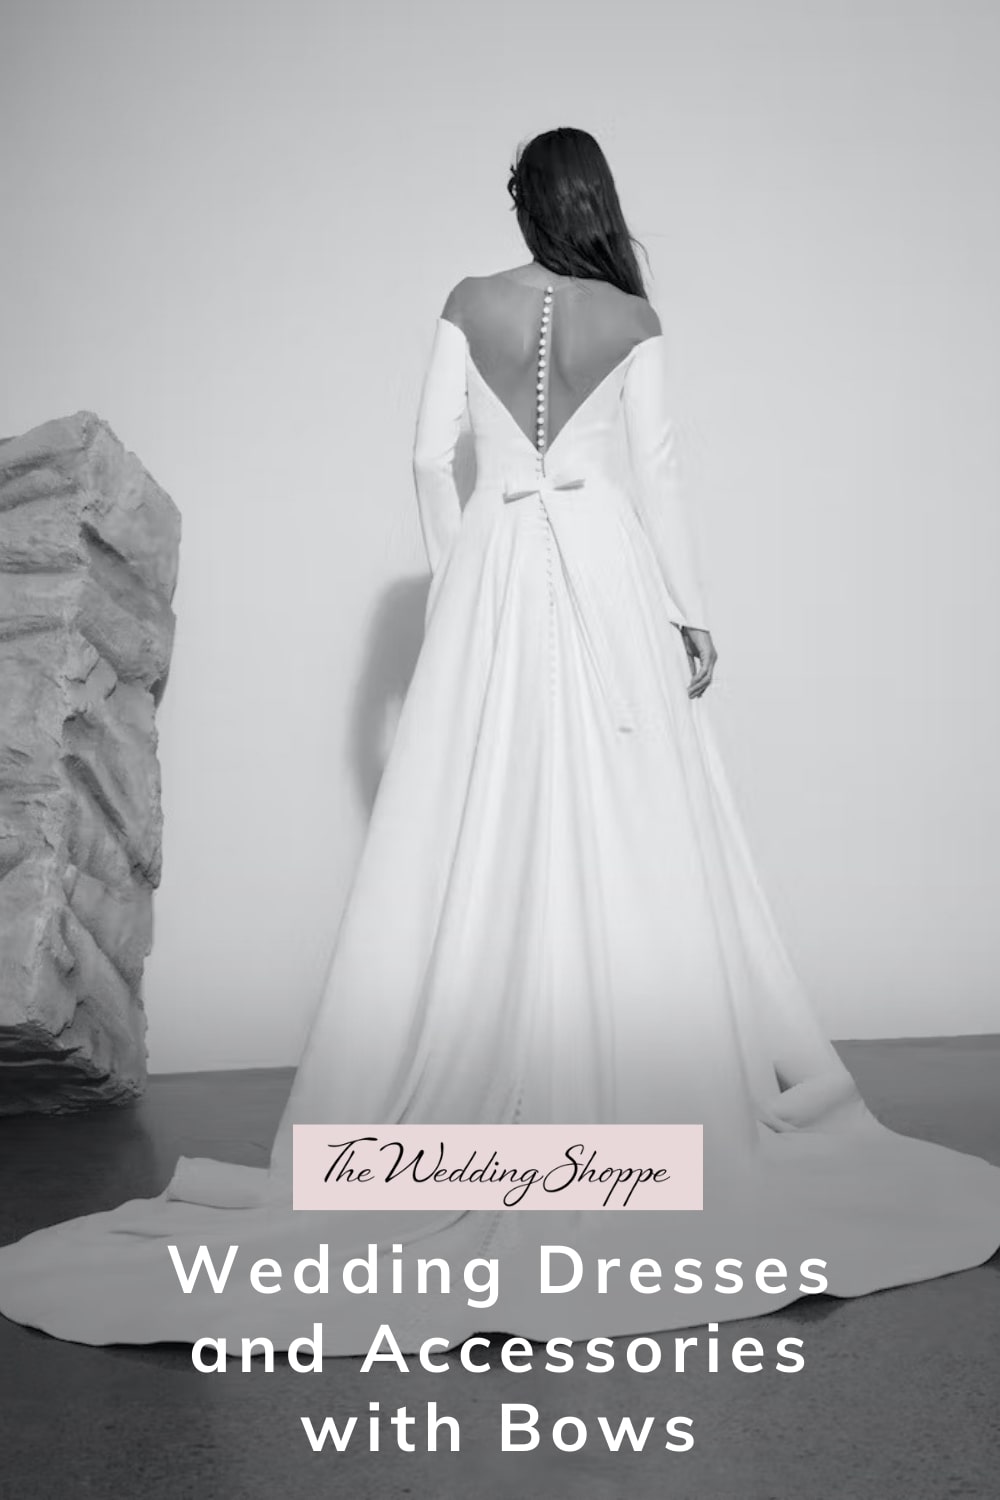 pinnable graphic for "Wedding Dresses and Accessories with Bows" from The Wedding Shoppe